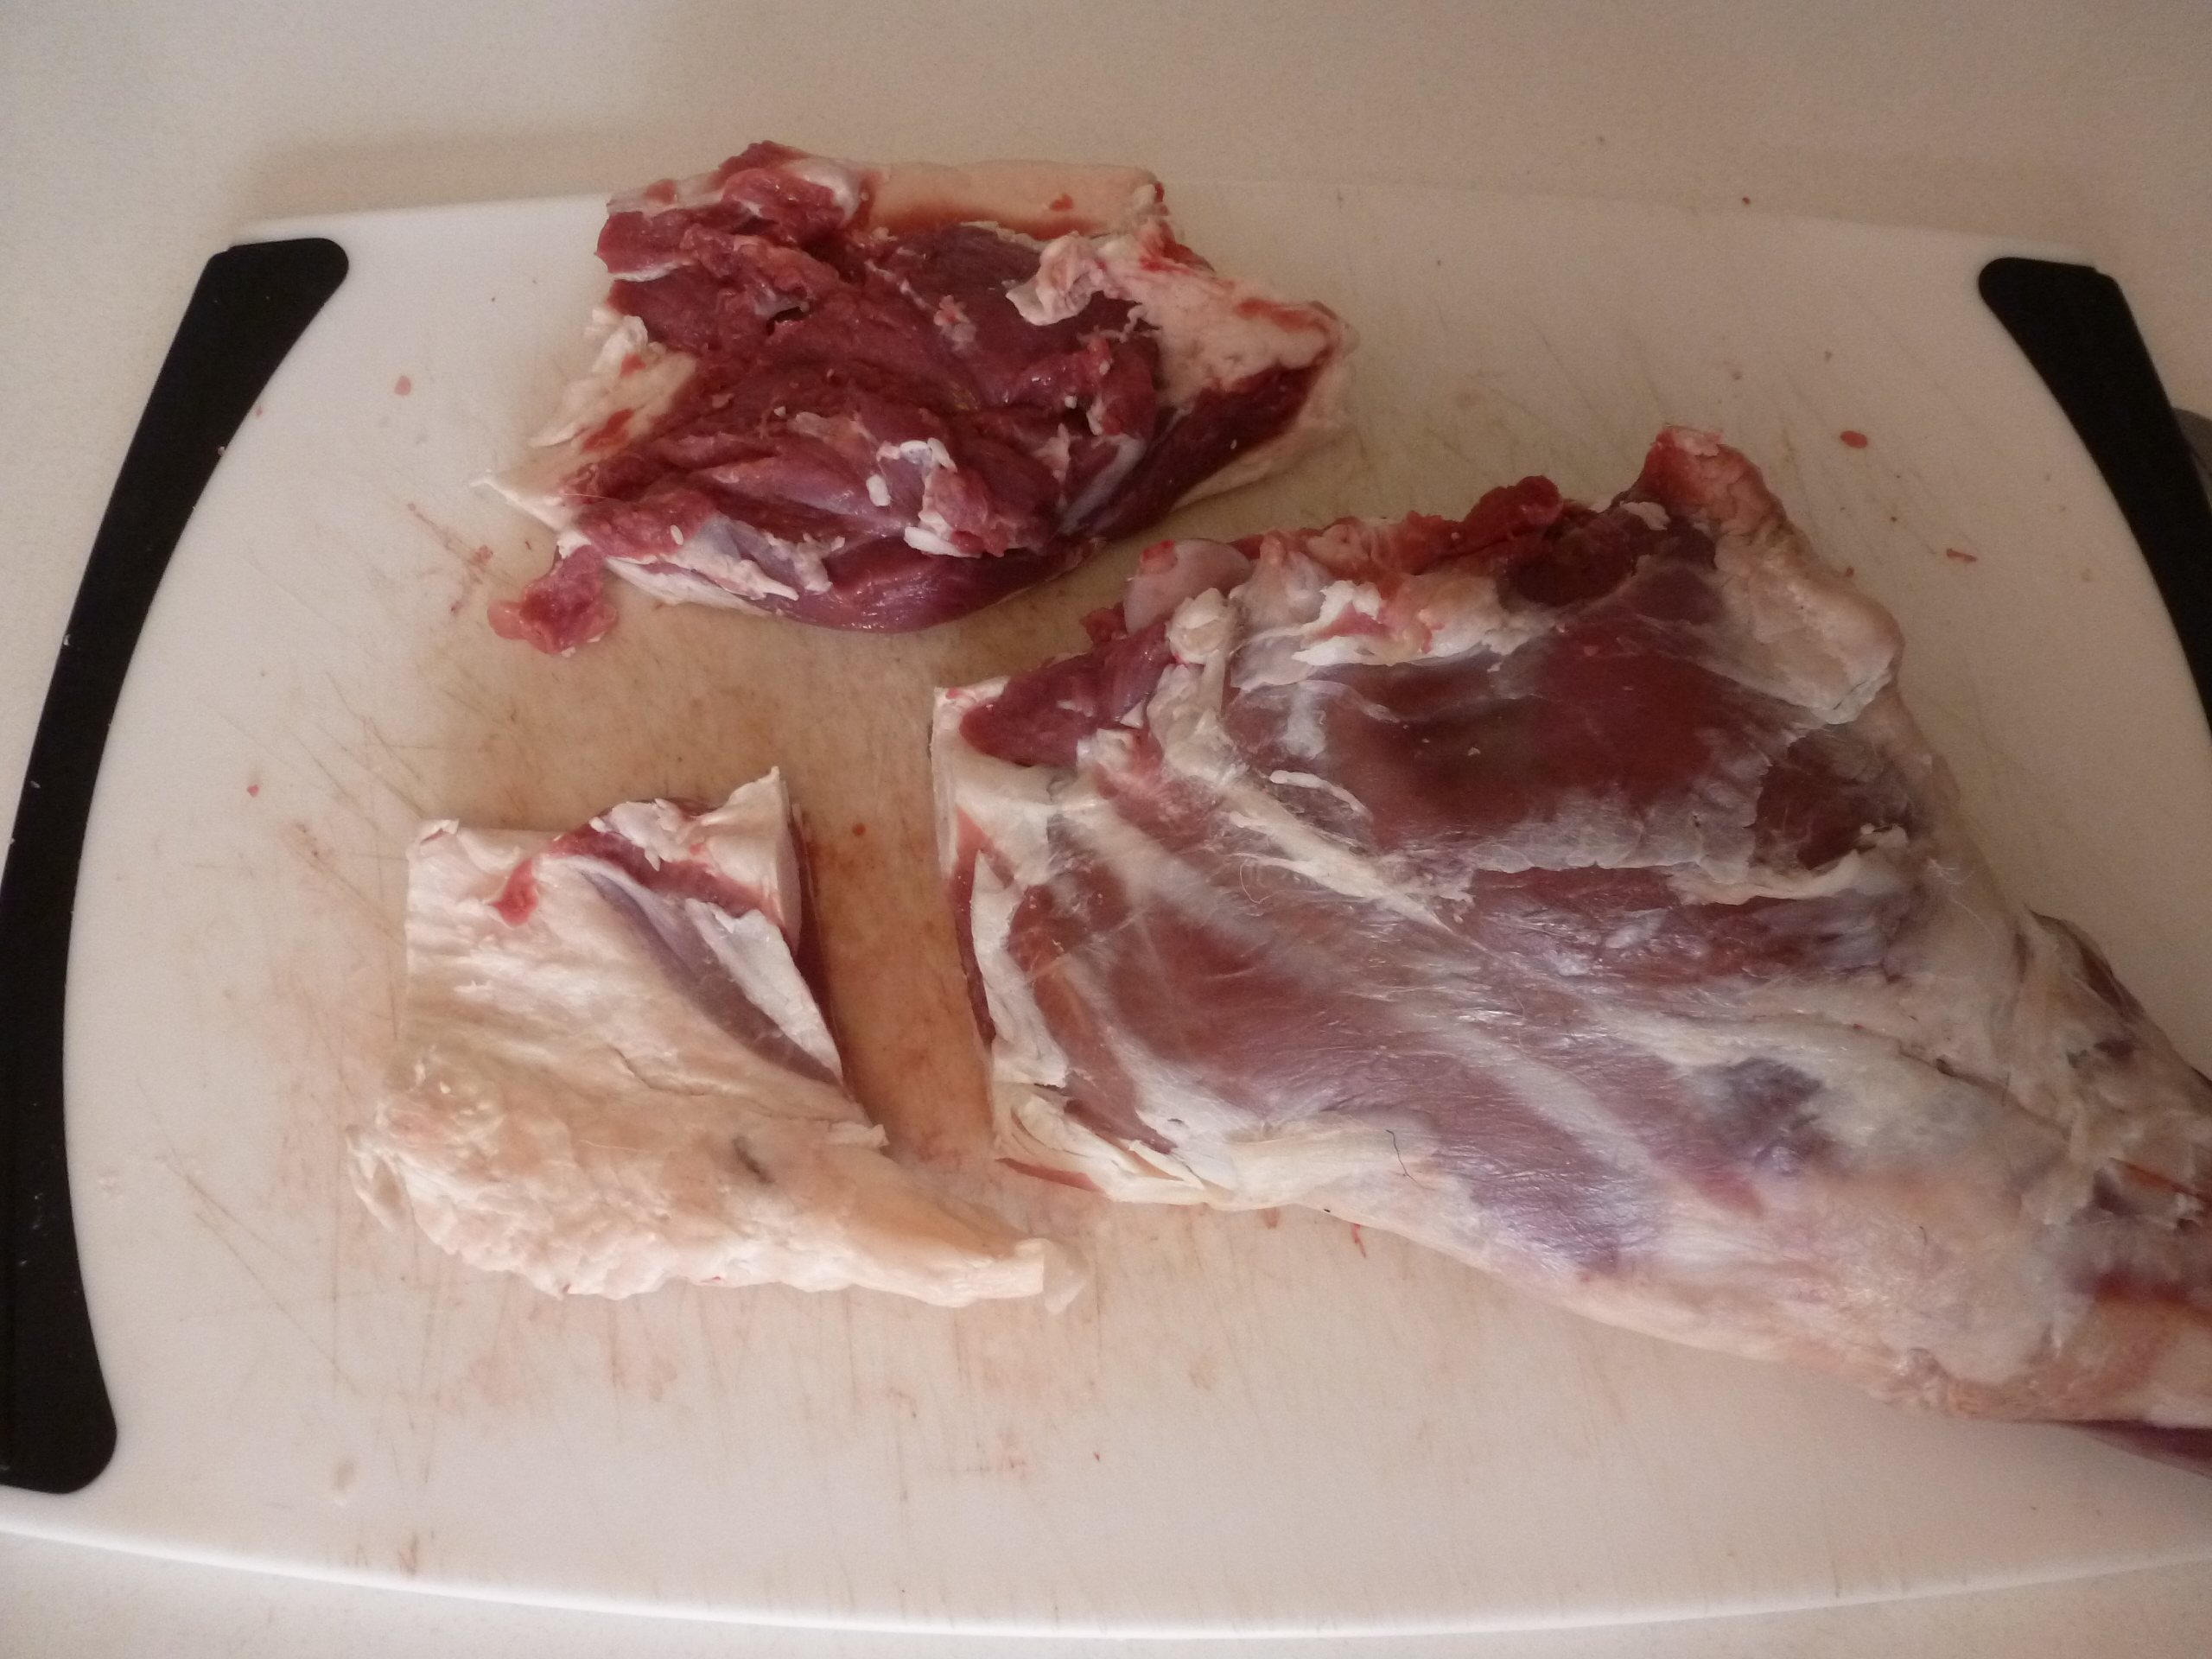 Removing the sirloin flap and some of the fatty tissue from the groin